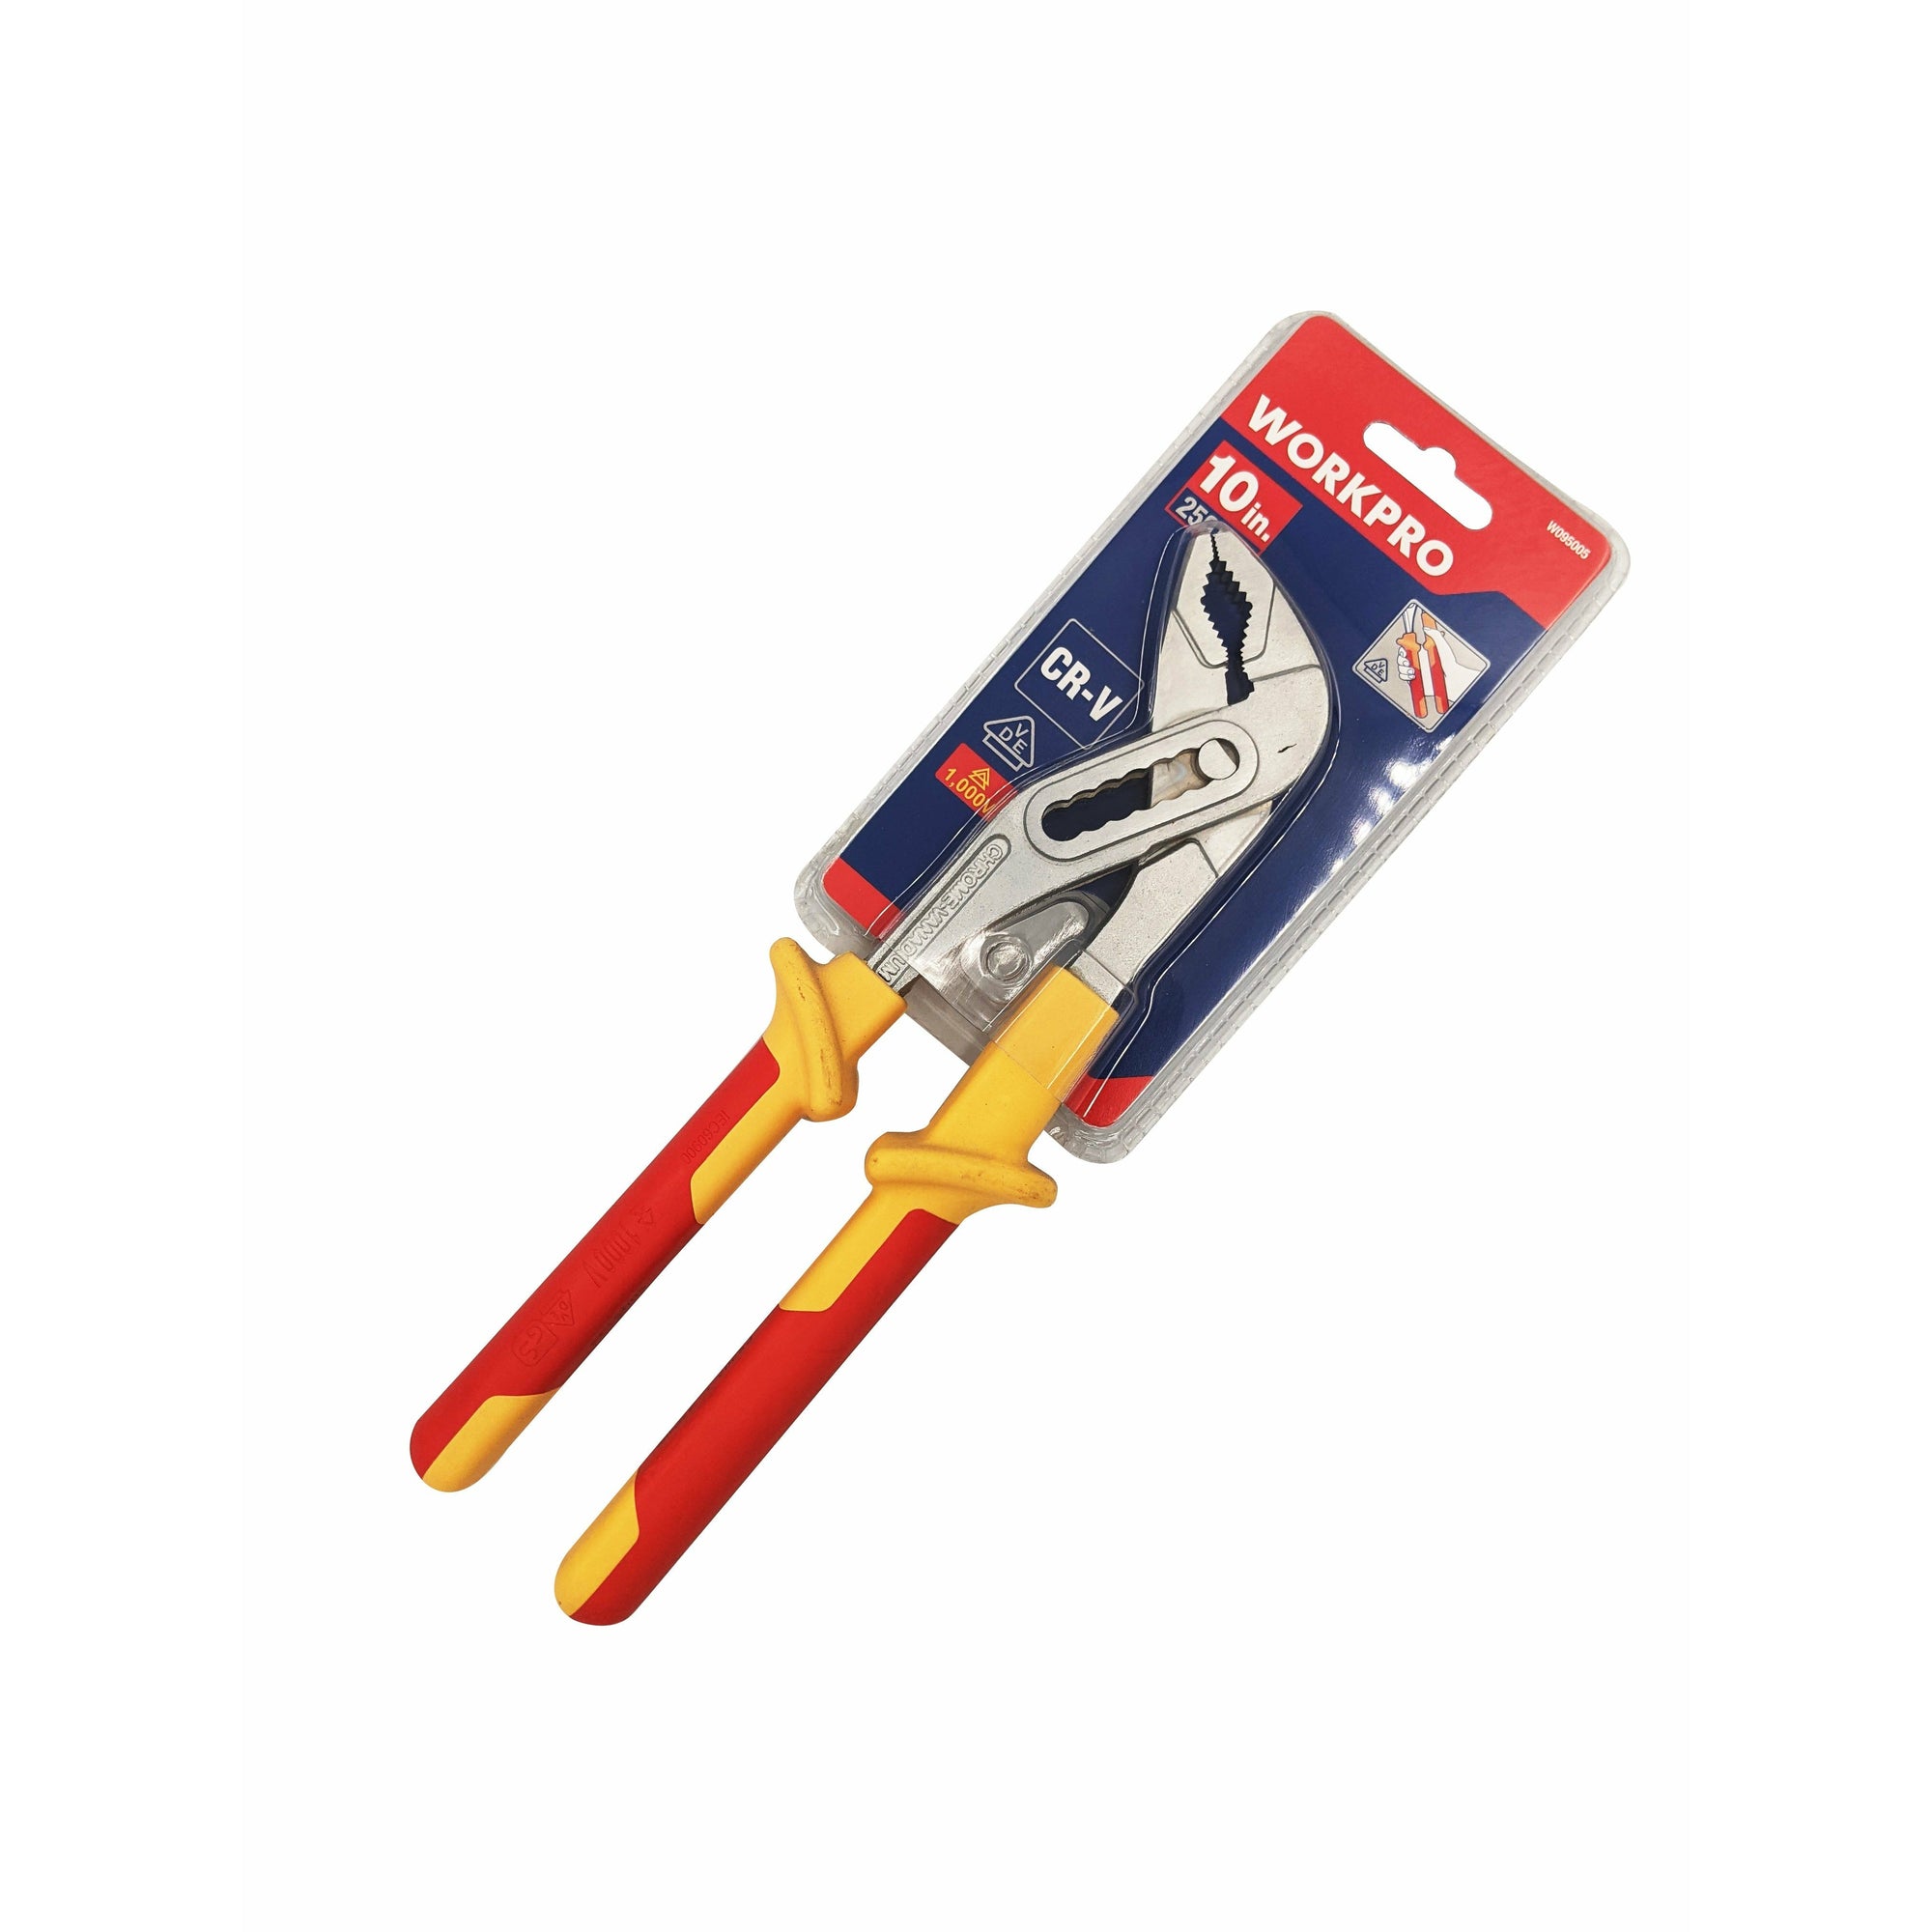 Workpro Vde Insulated Groove Joint Pliers